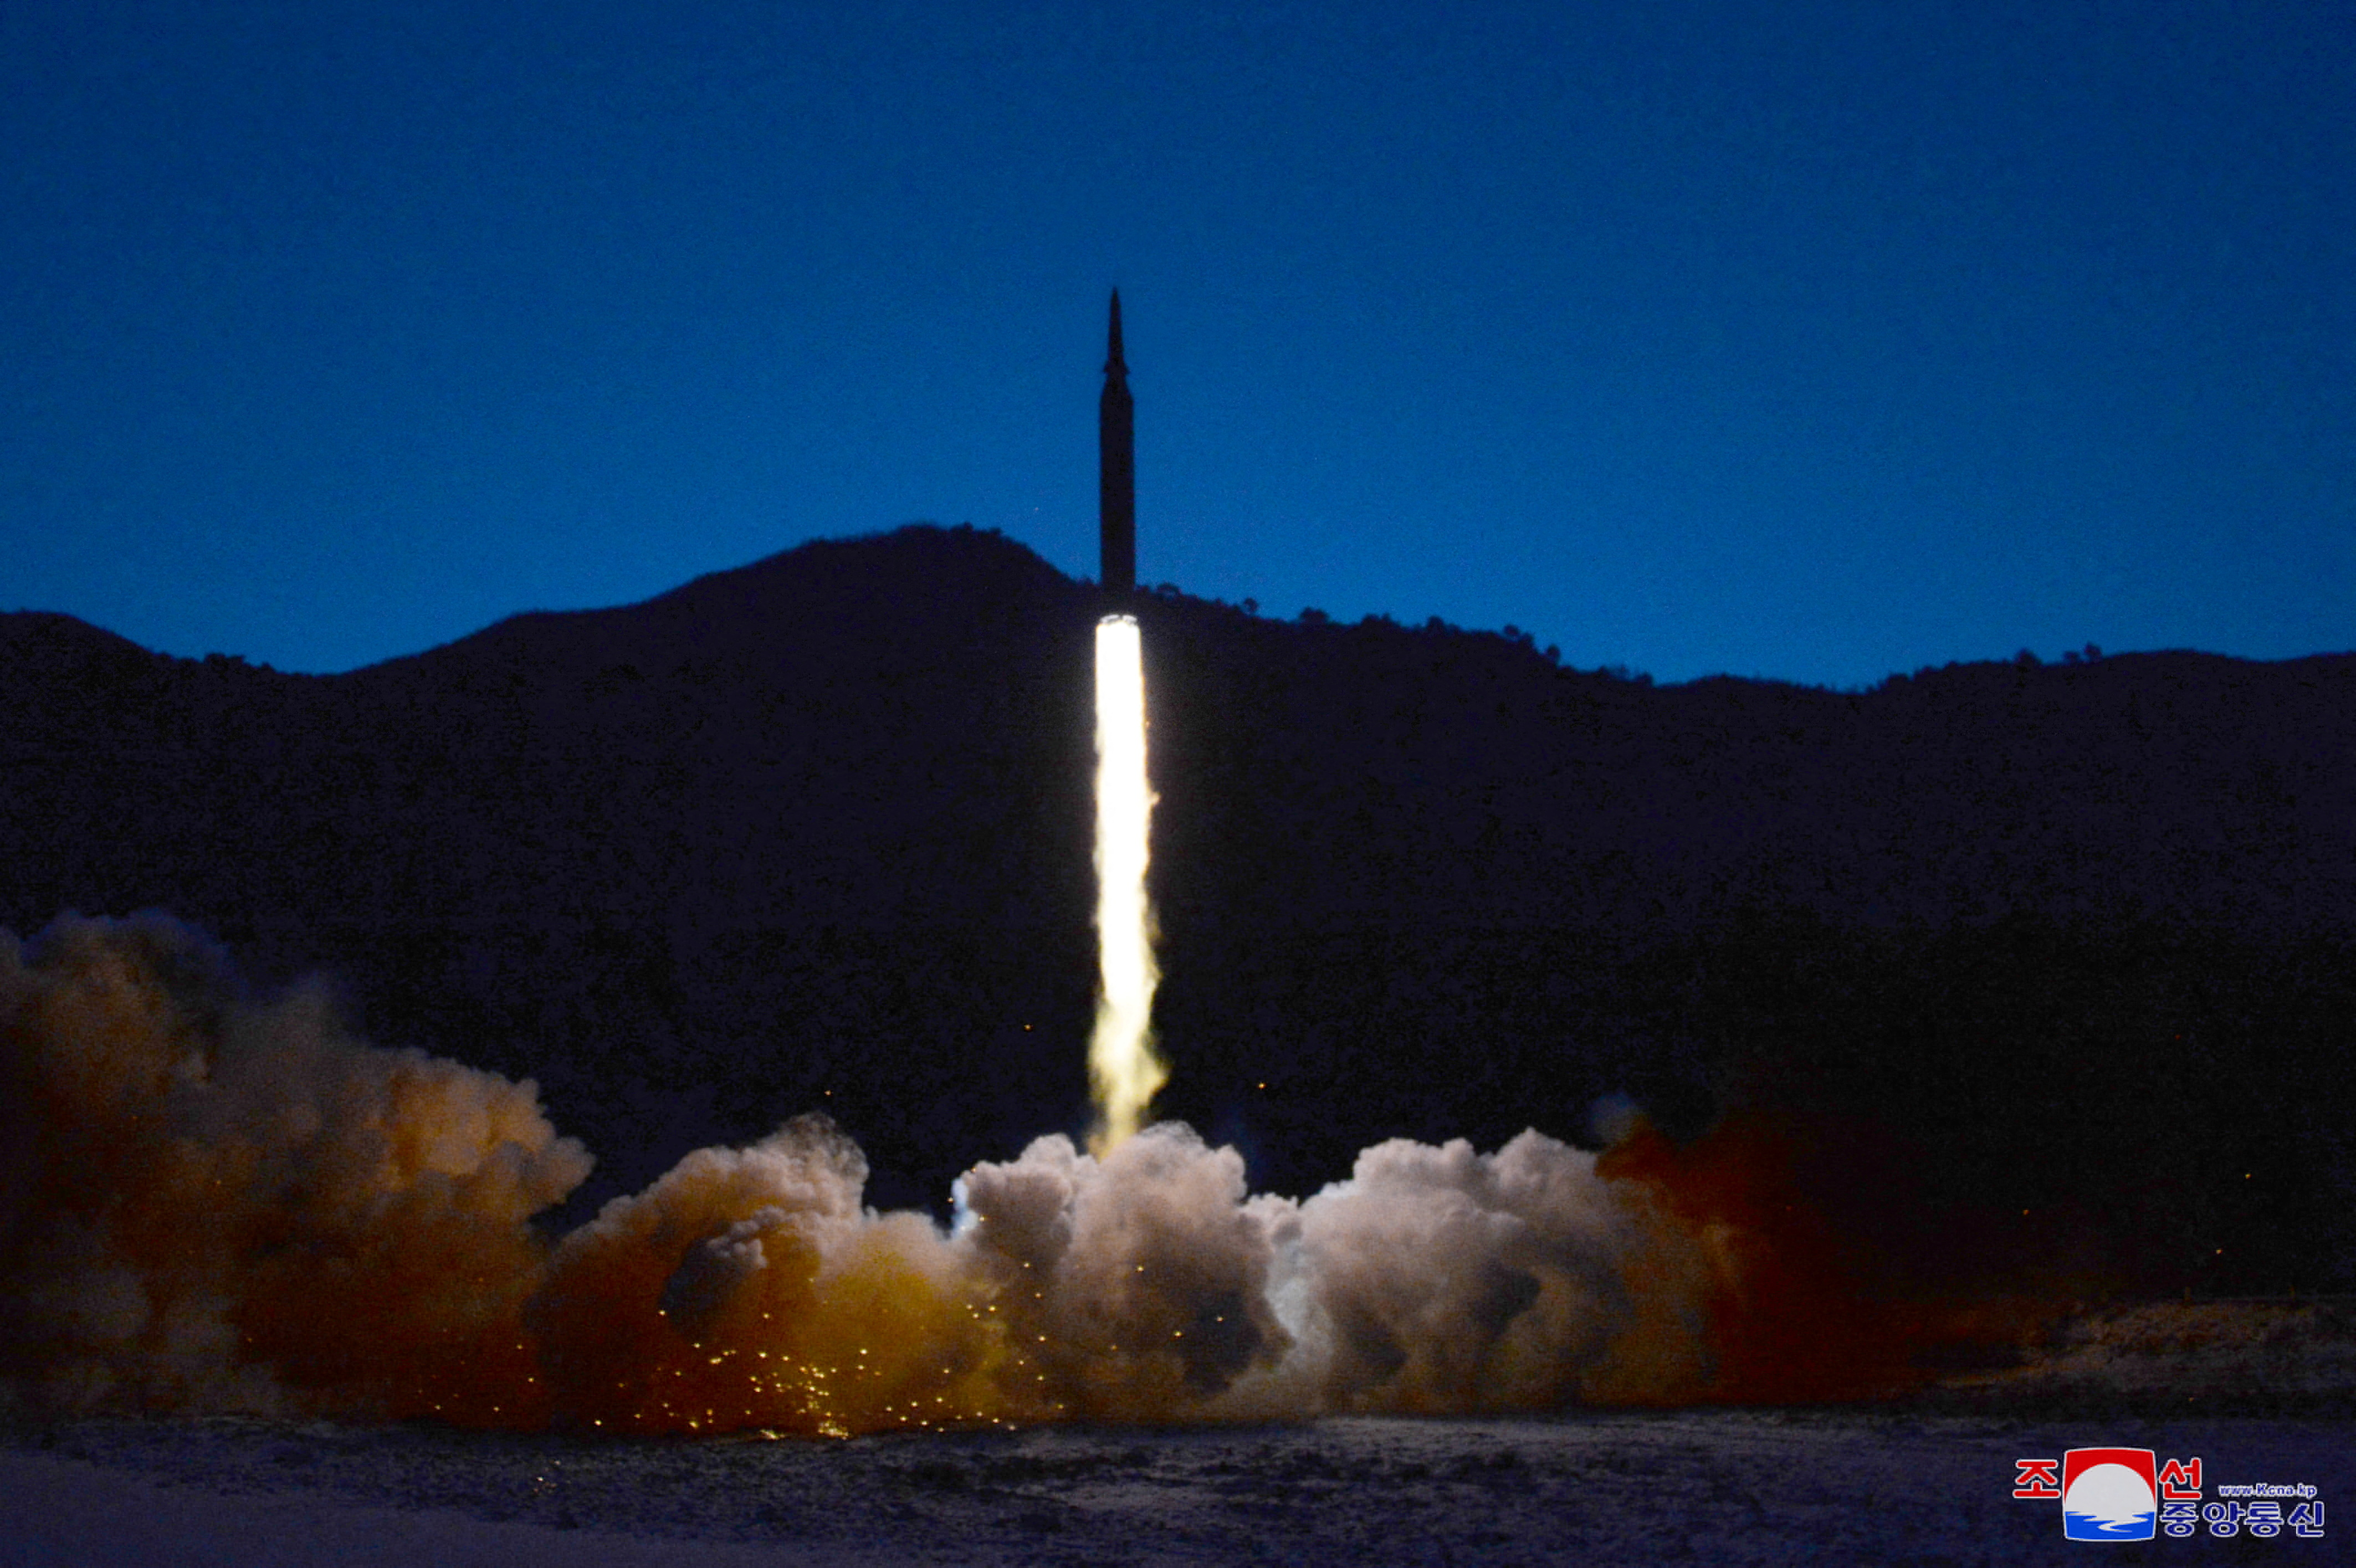 A missile is launched during what state media report is a hypersonic missile test at an undisclosed location in North Korea